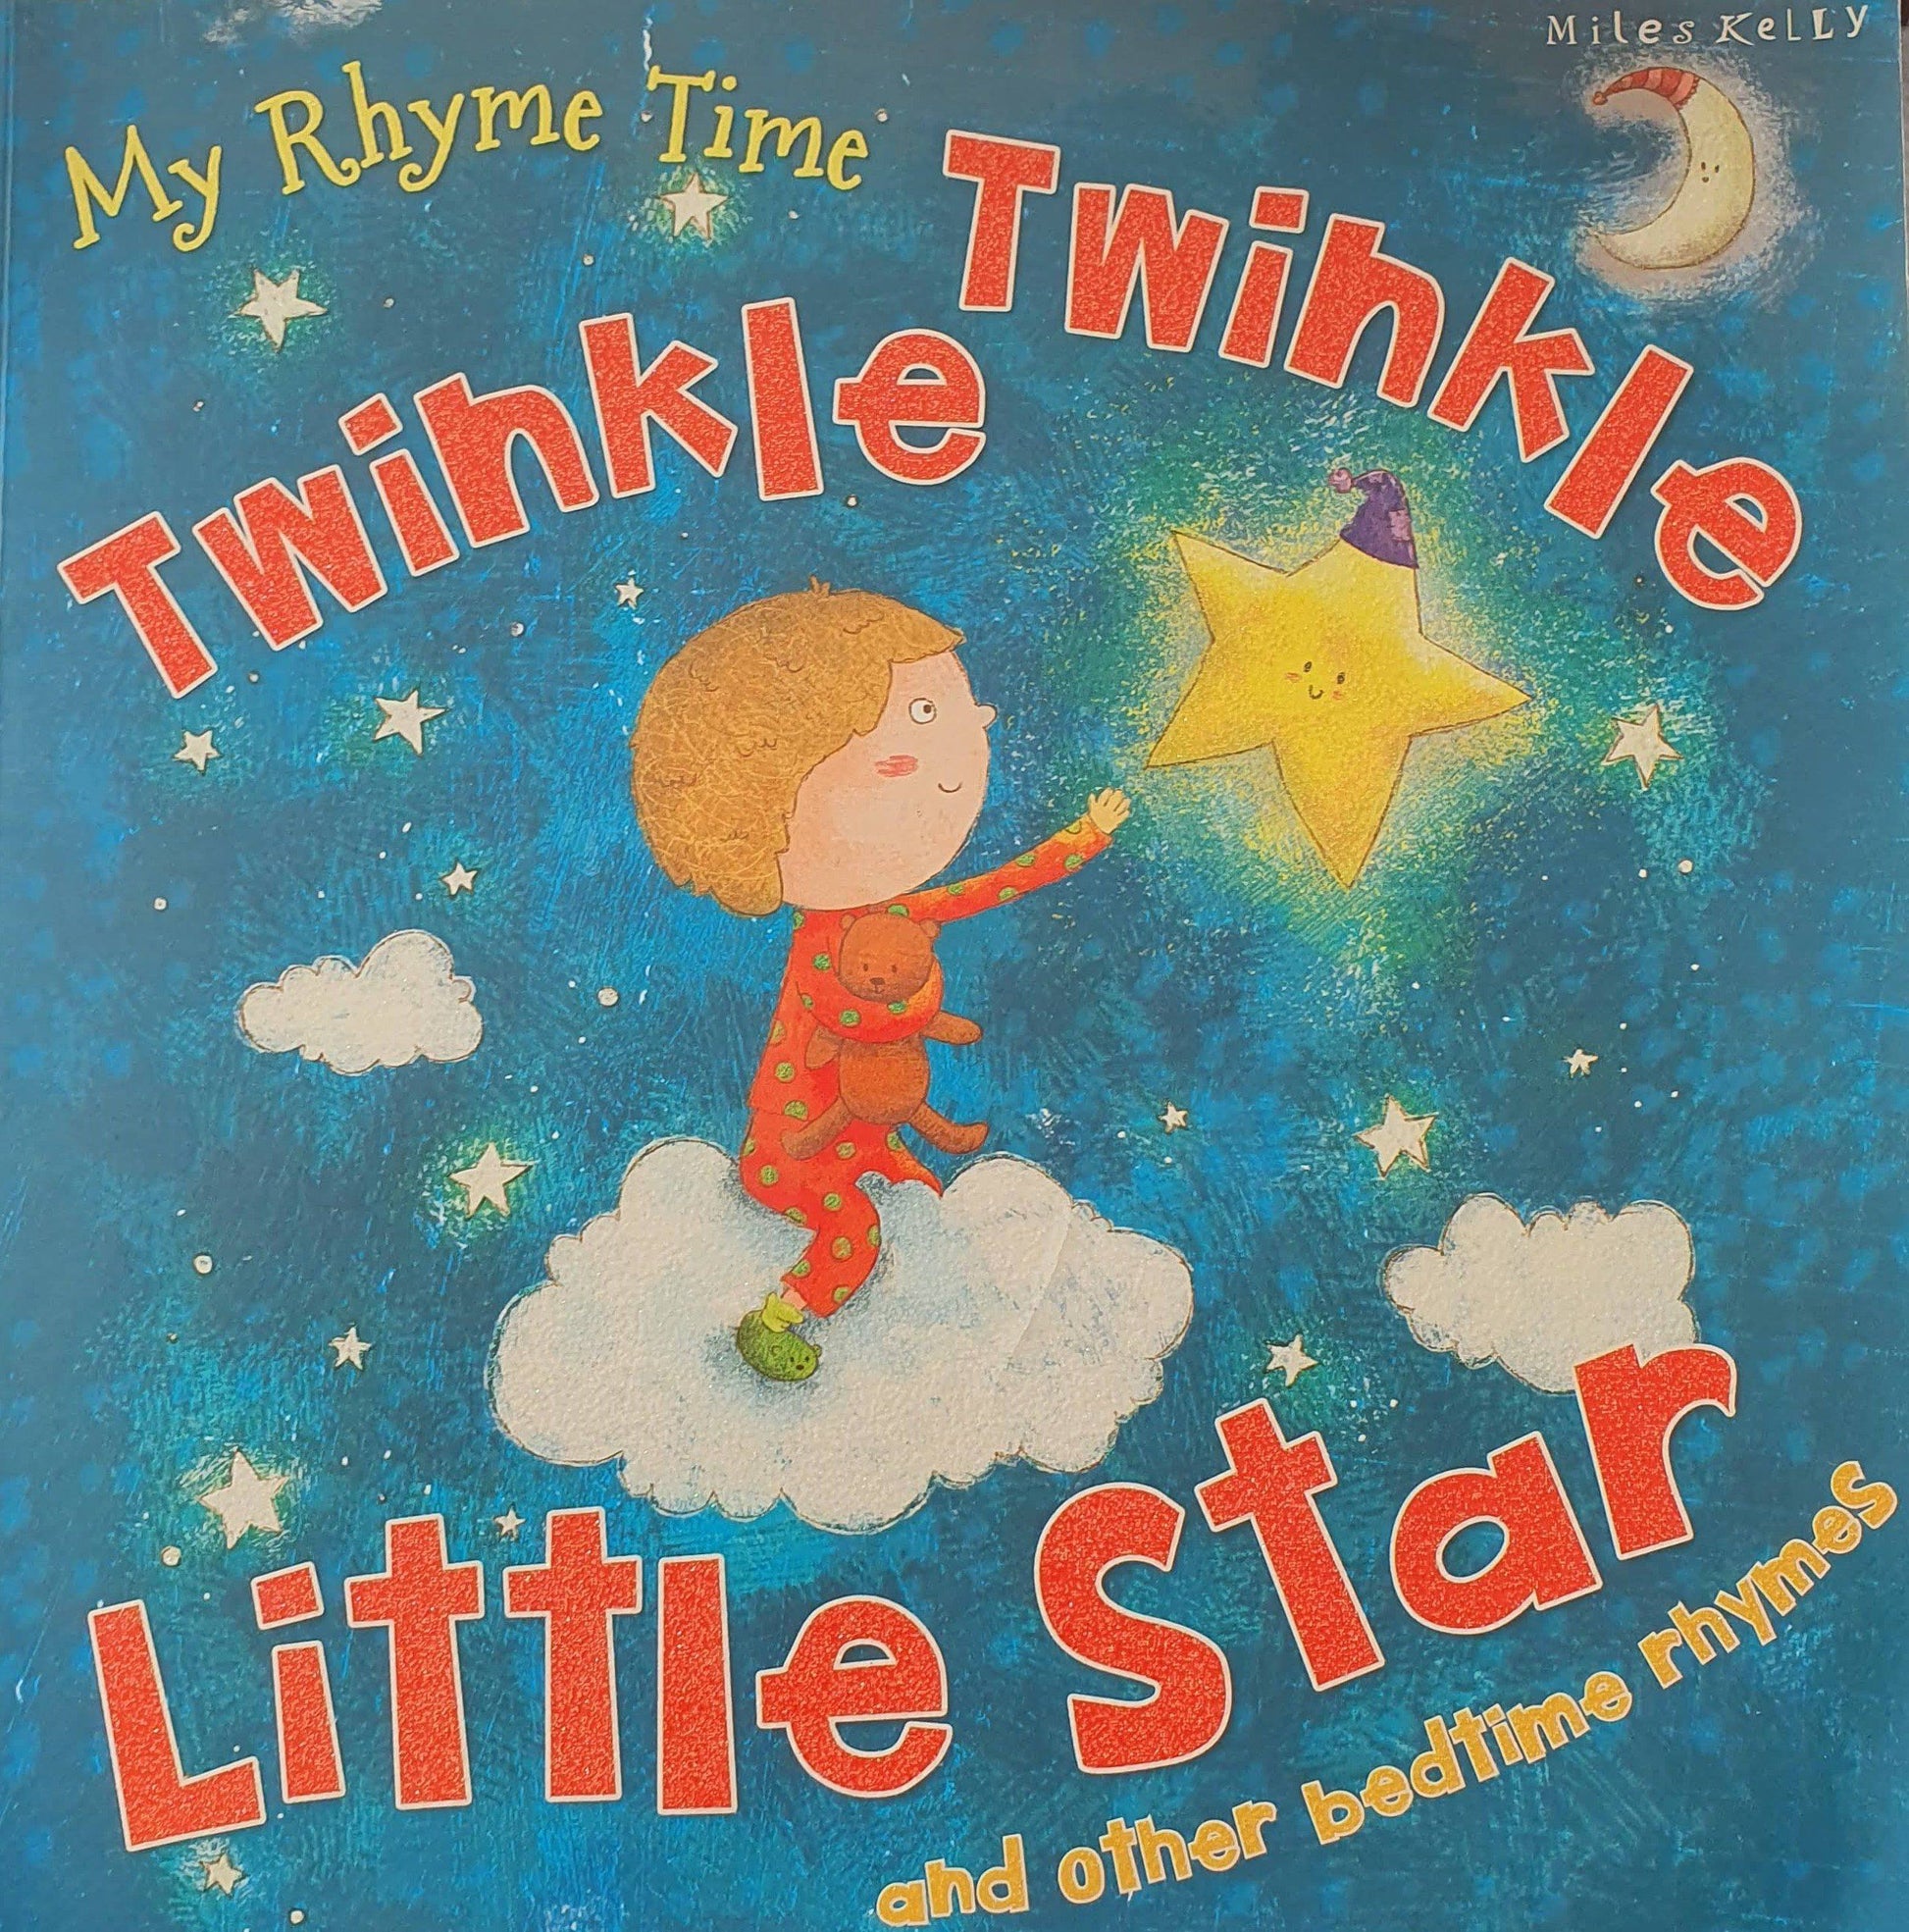 My Rhyme Time twinkle twinkle little start and other bedtime rhymes Very Good, 3+ Age Recuddles.ch  (6332491858105)